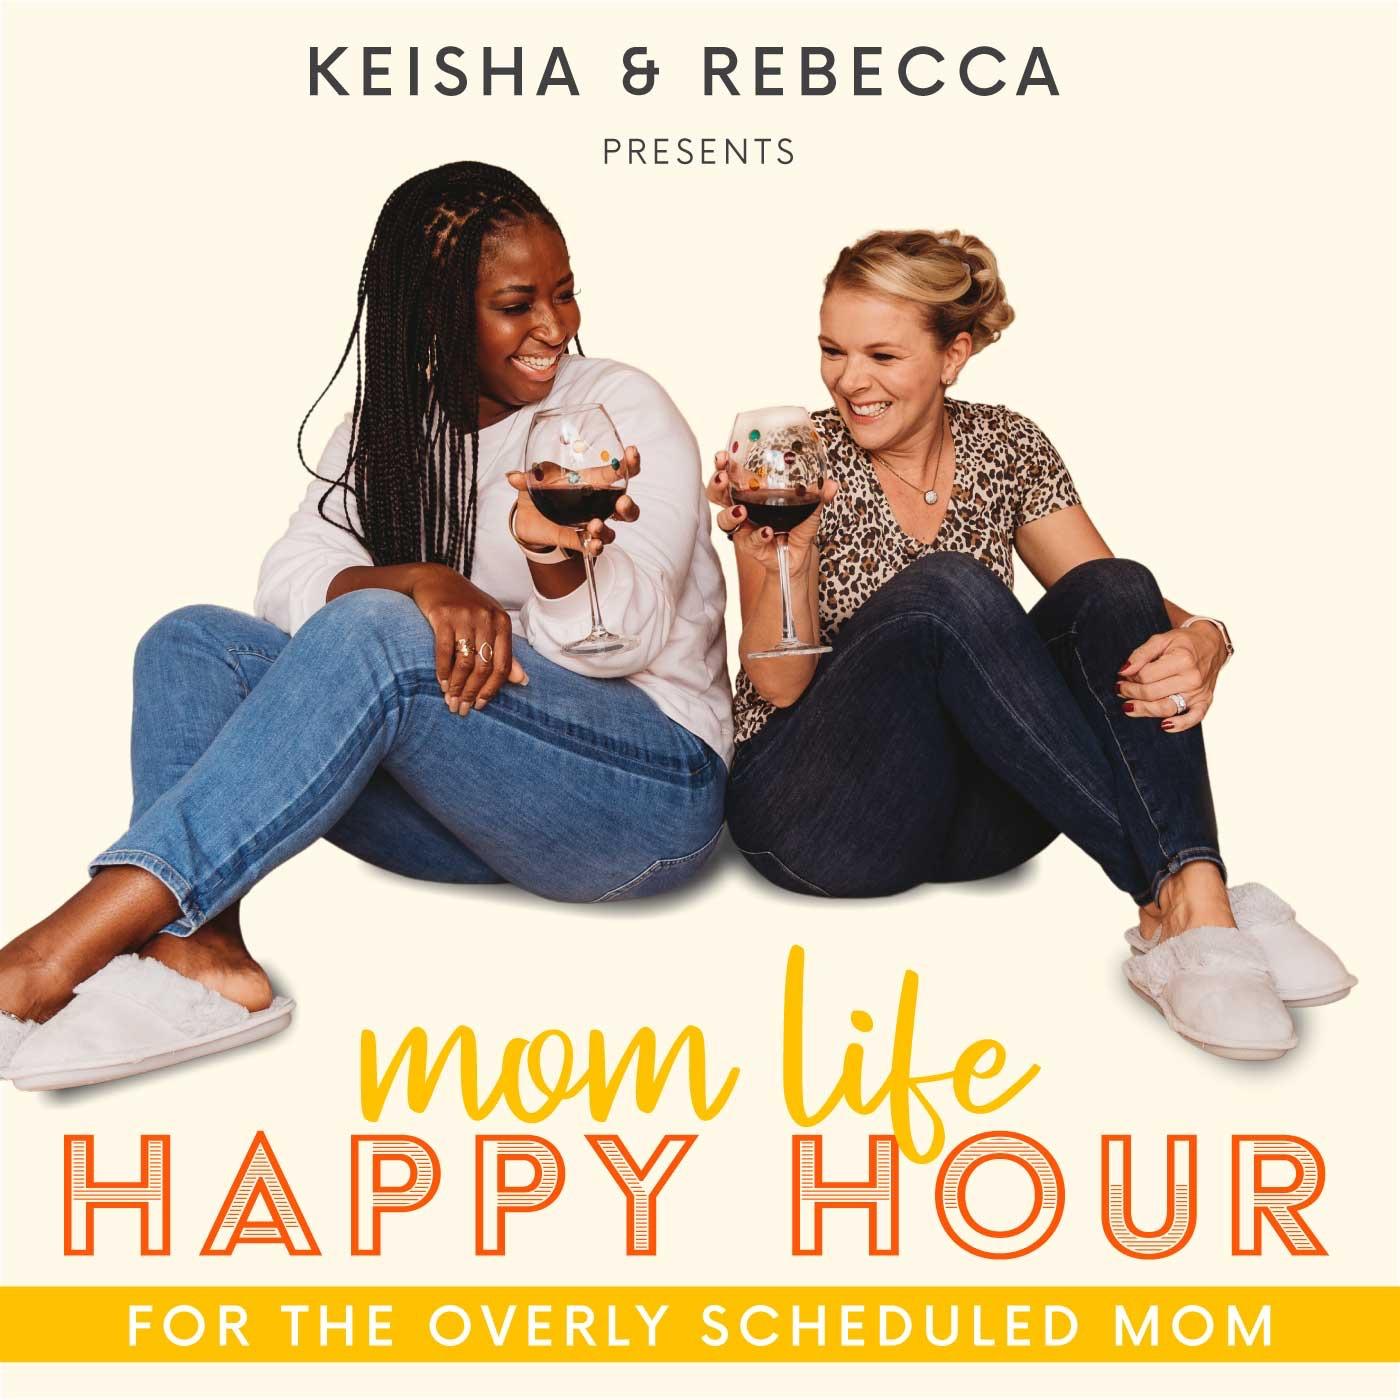 Mom Life Happy Hour  | Girl Chat, Mom Life, Parenting, Happy Hour, Wellness, Style, Love, Dating, Marriage, Woman, Working Mom, Glam, Mental Health, Relationships, Personal Growth